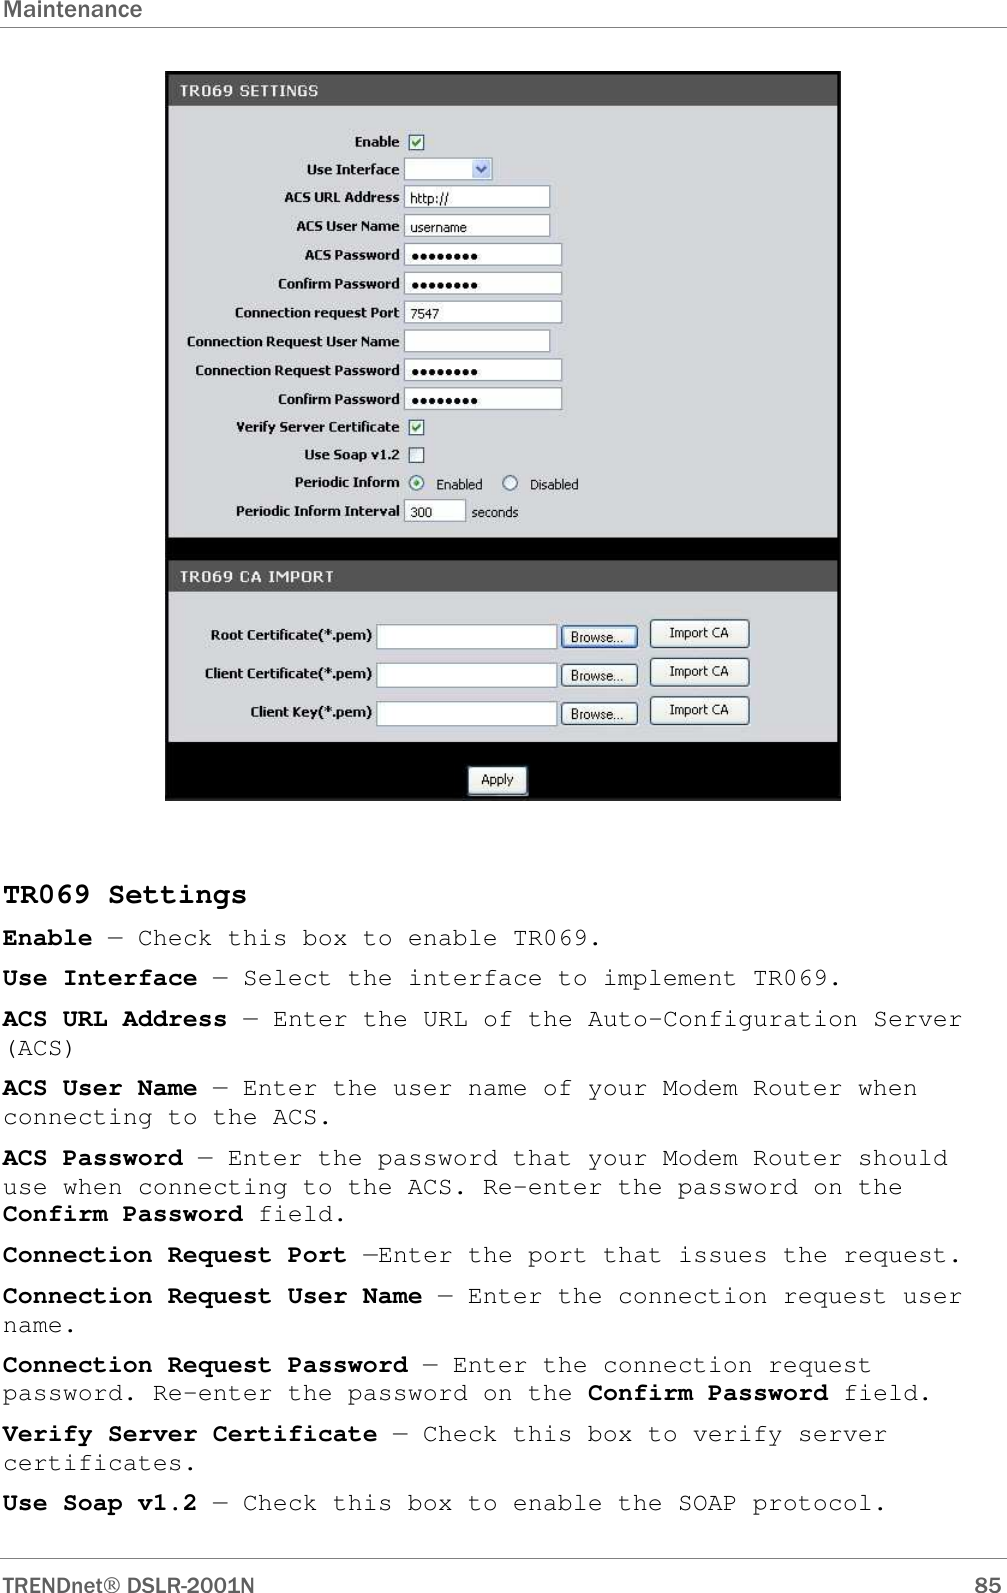 Maintenance      TRENDnet DSLR-2001N        85   TR069 Settings Enable — Check this box to enable TR069. Use Interface — Select the interface to implement TR069. ACS URL Address — Enter the URL of the Auto-Configuration Server (ACS) ACS User Name — Enter the user name of your Modem Router when connecting to the ACS. ACS Password — Enter the password that your Modem Router should use when connecting to the ACS. Re-enter the password on the Confirm Password field. Connection Request Port —Enter the port that issues the request. Connection Request User Name — Enter the connection request user name. Connection Request Password — Enter the connection request password. Re-enter the password on the Confirm Password field. Verify Server Certificate — Check this box to verify server certificates. Use Soap v1.2 — Check this box to enable the SOAP protocol. 